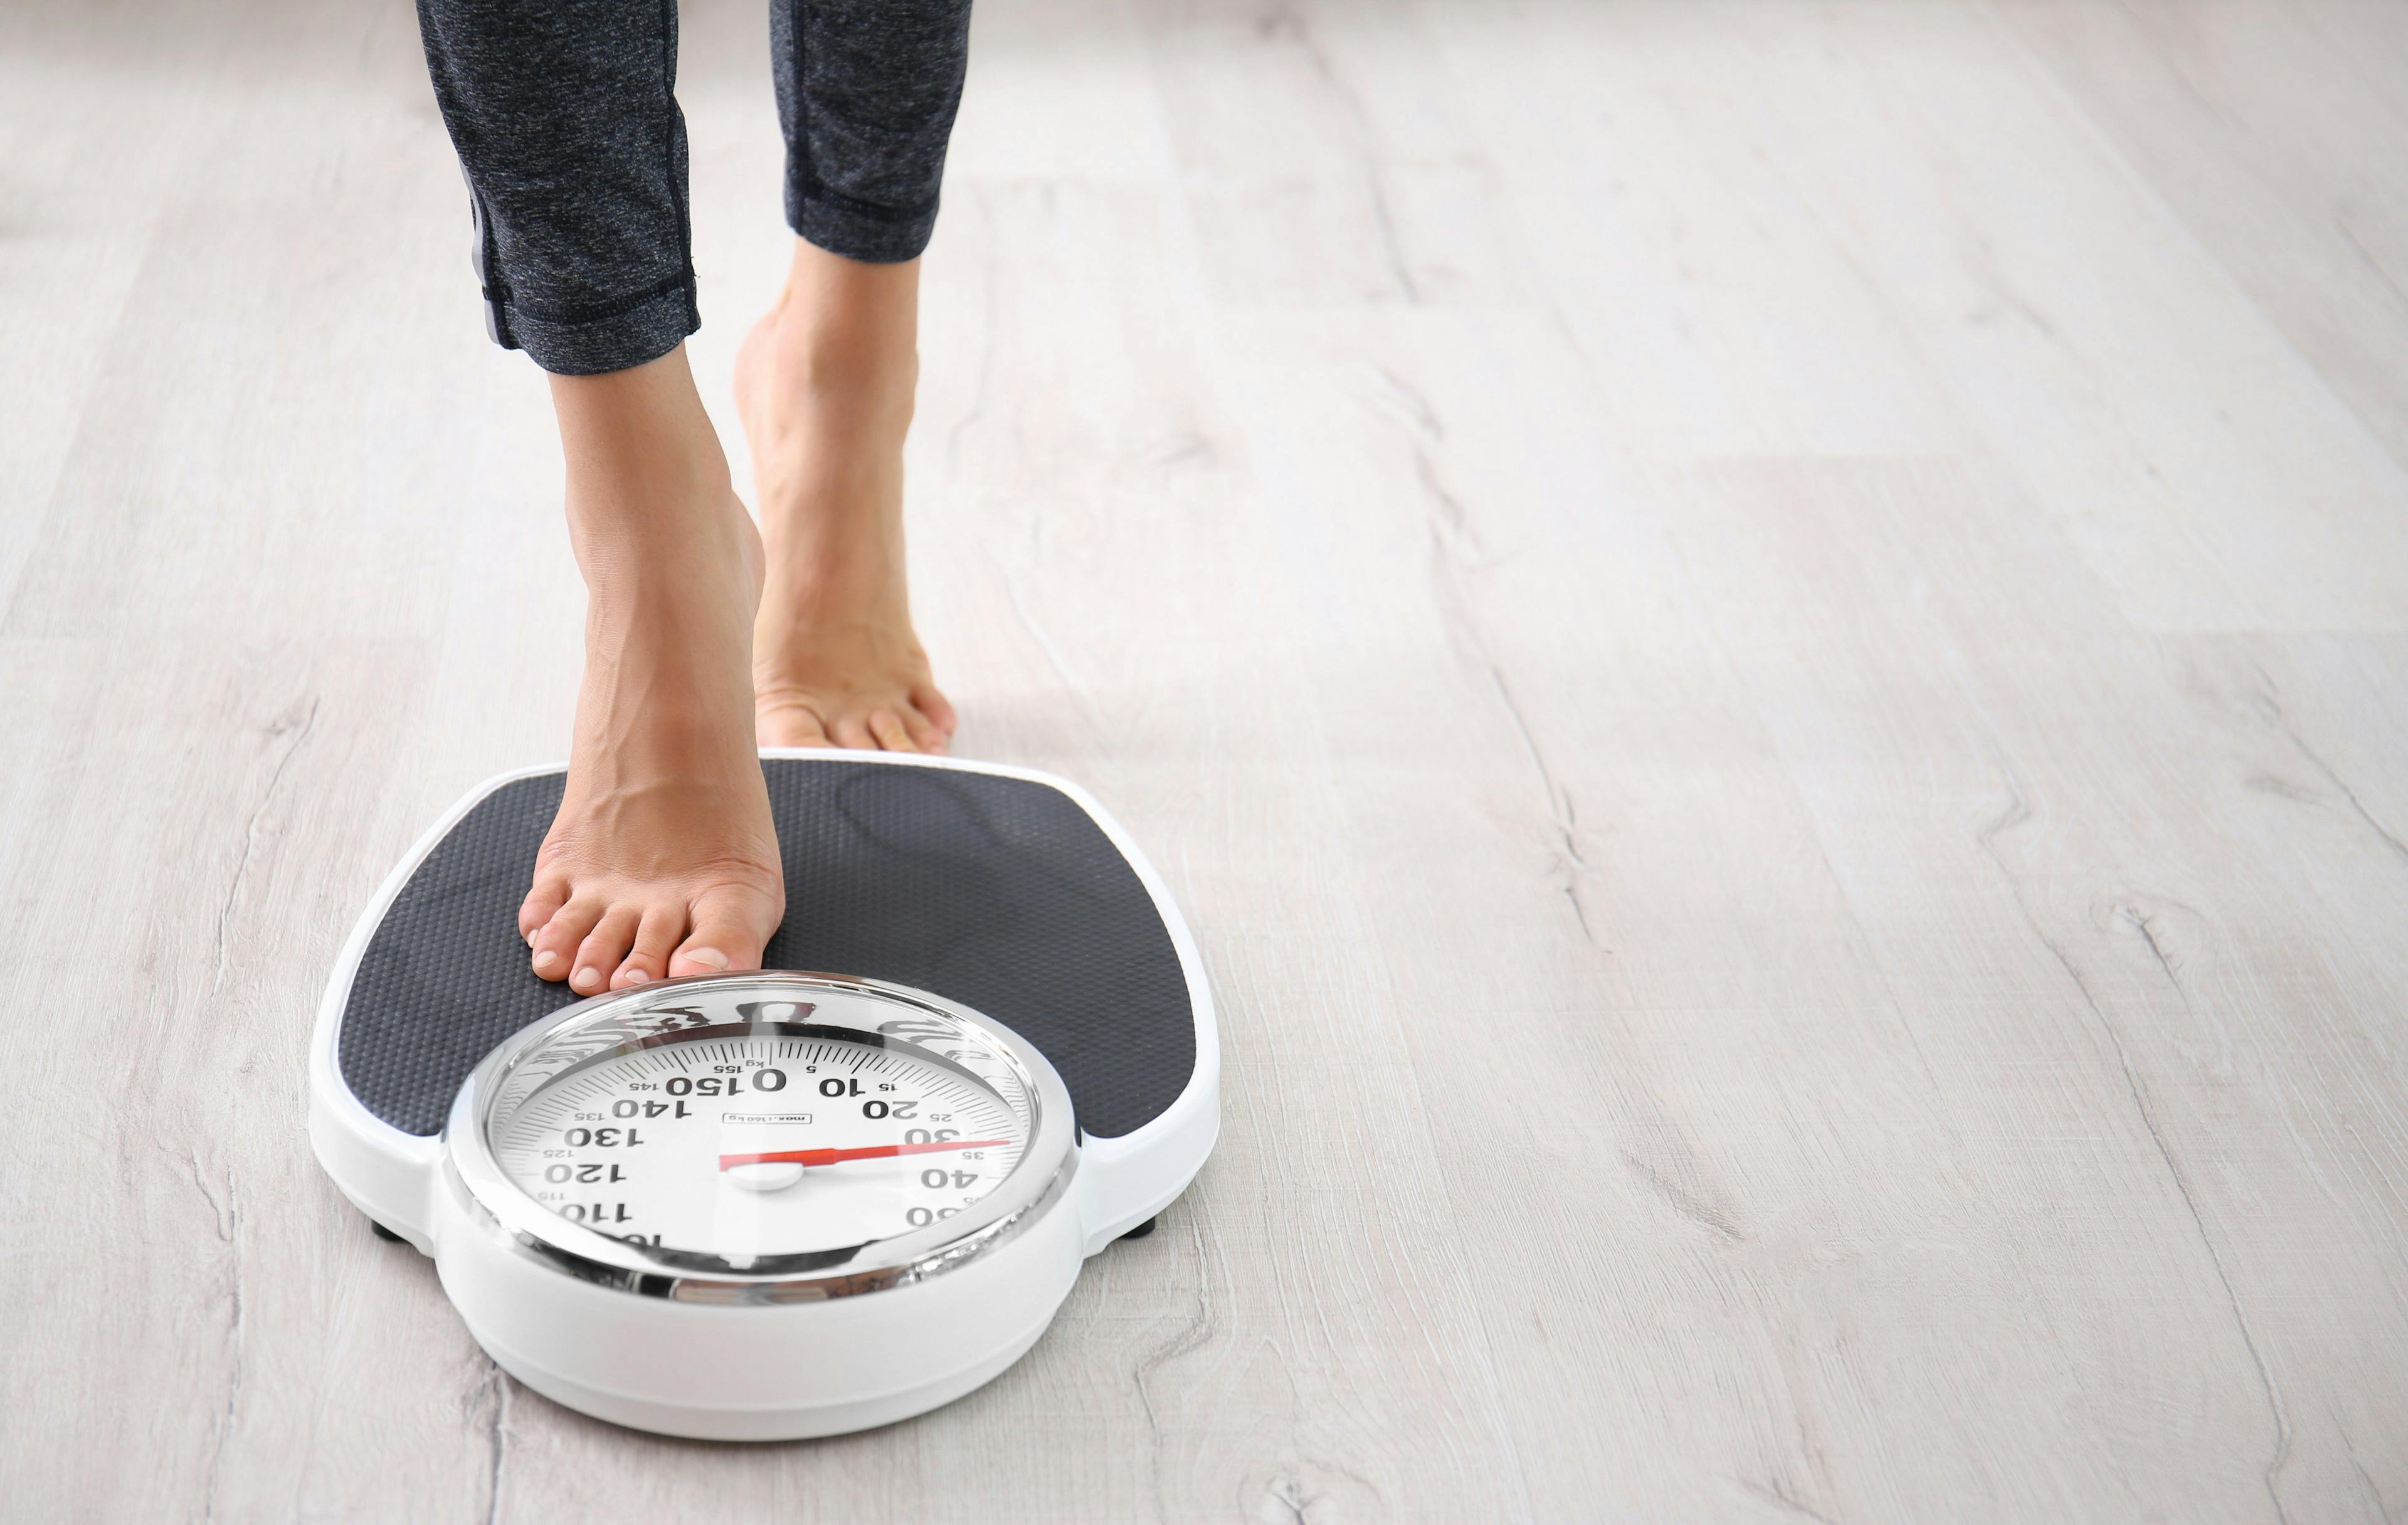 The Human Body Has Internal Scale to Sense Body Weight Says Study